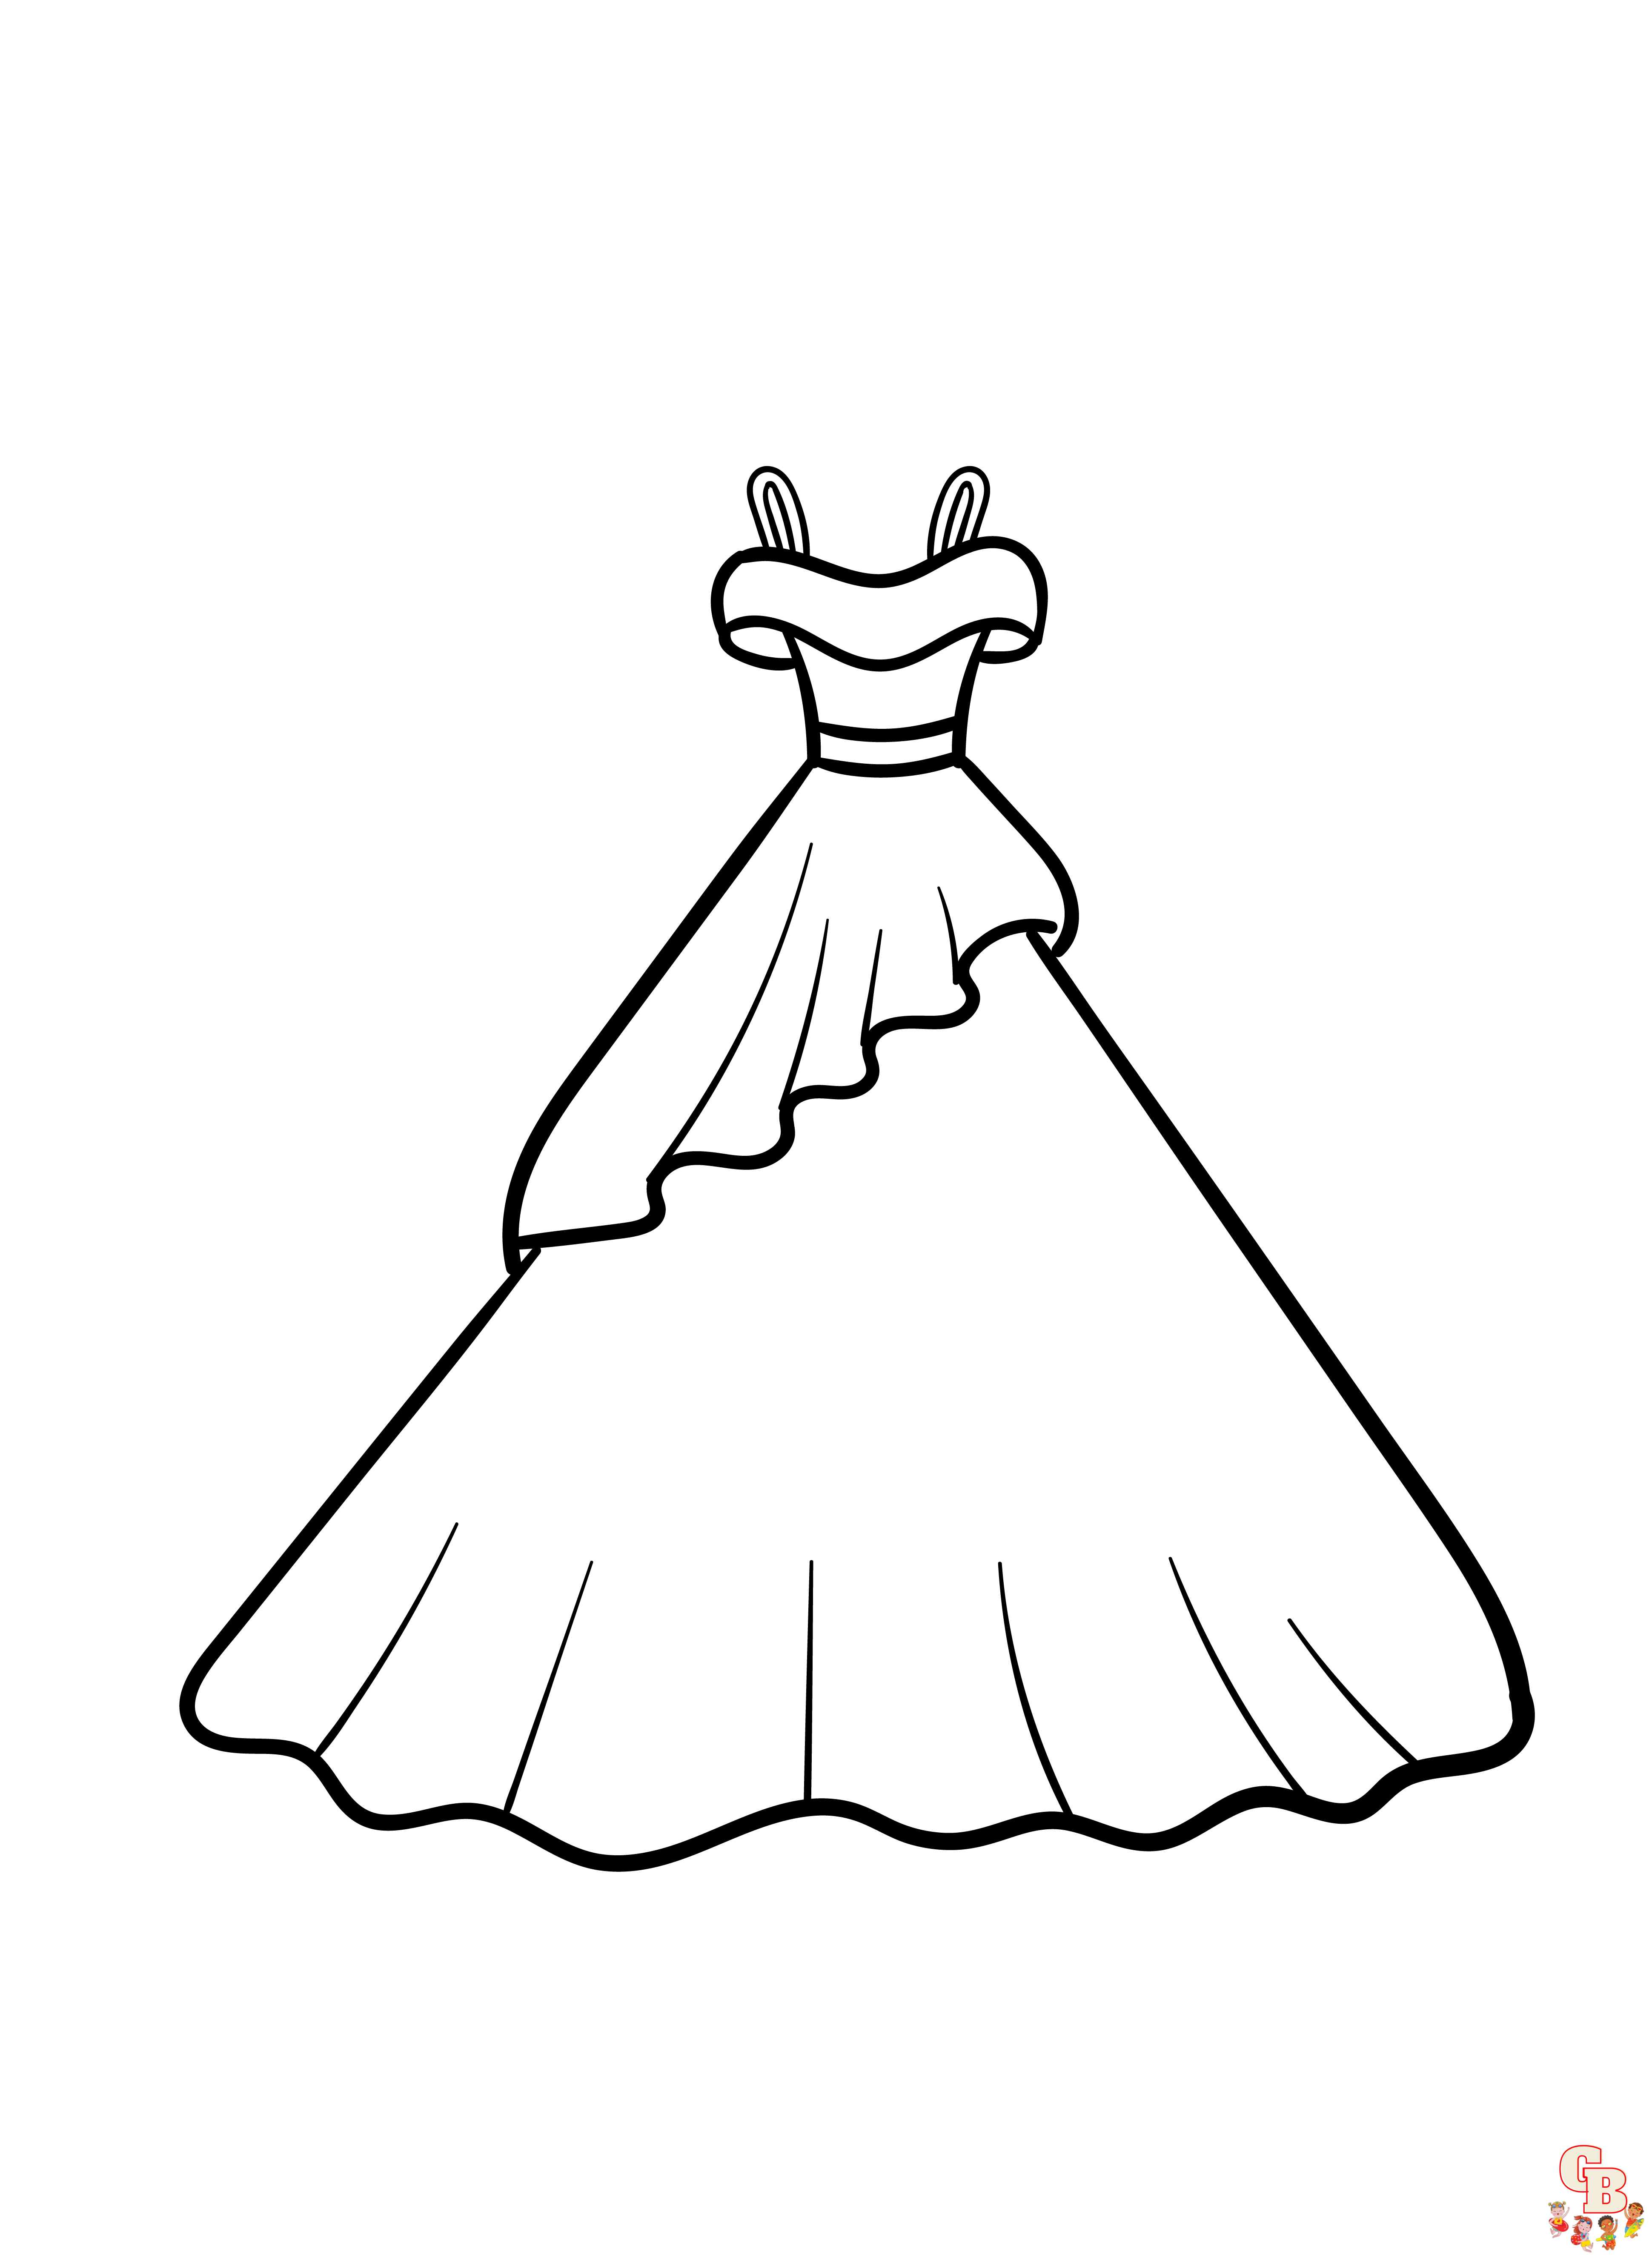 Get This Wedding Dress Coloring Pages - 8sn3 !